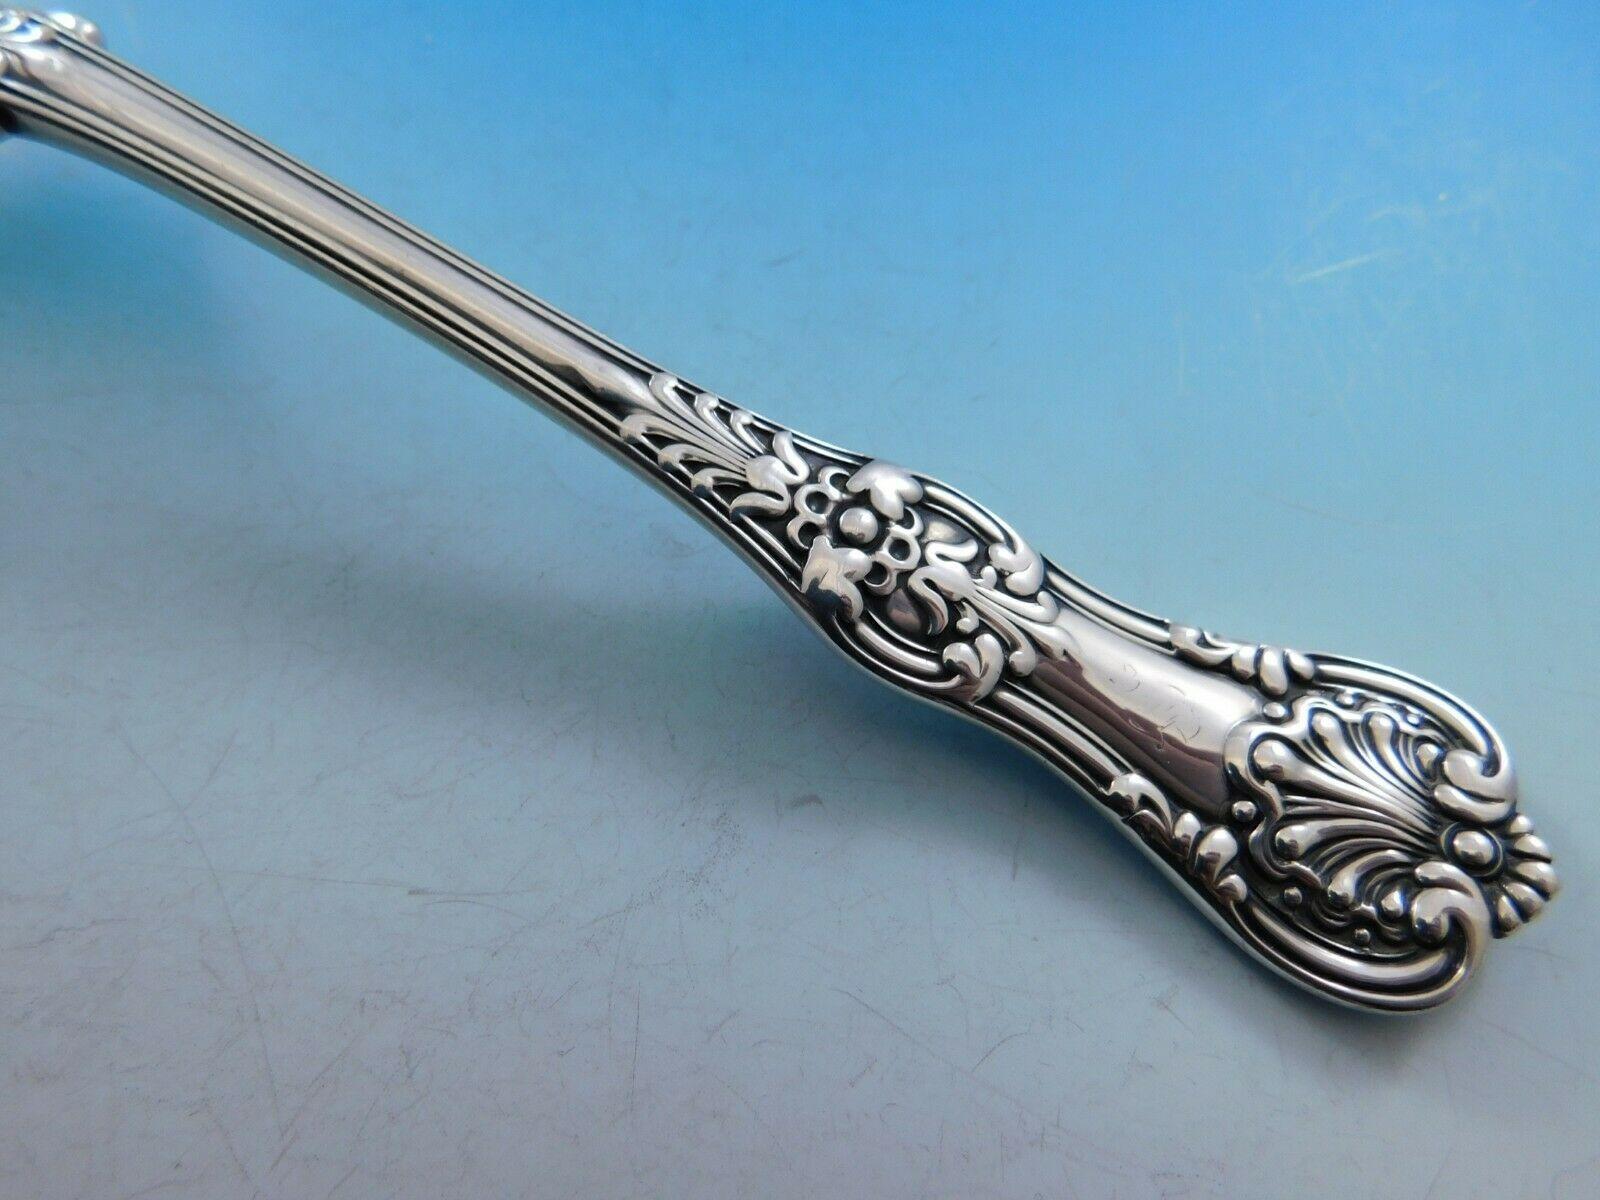 Patterns similar to our English King were first used in France and England late in the eighteenth century and have remained among the most popular styles for flatware today, in both Europe and America. Tiffany & Co. first made its own version of